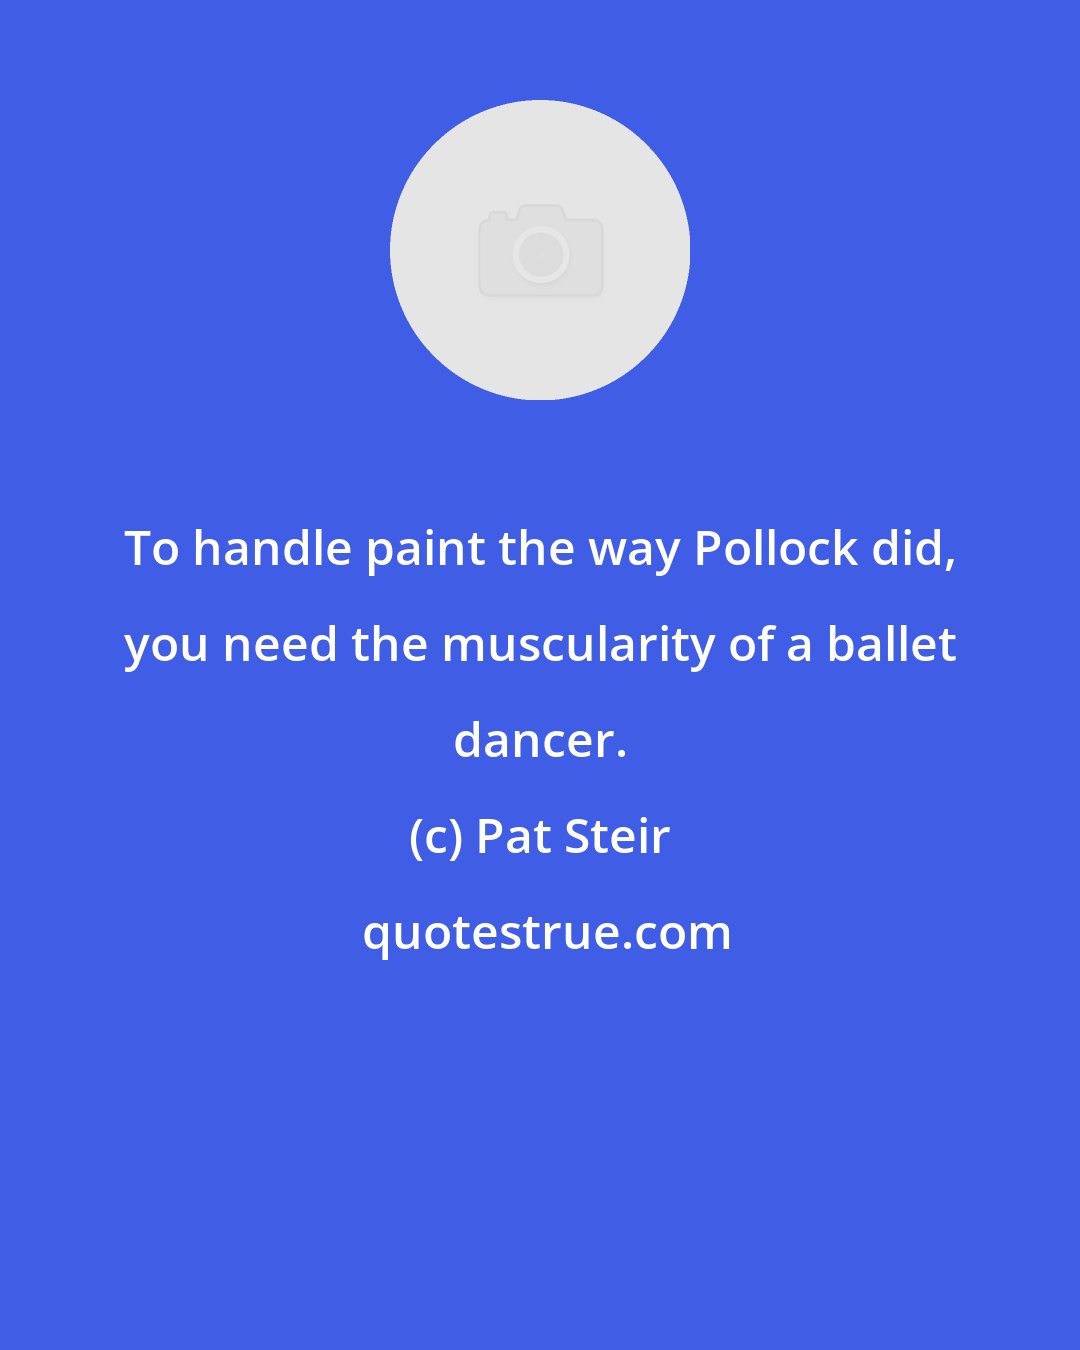 Pat Steir: To handle paint the way Pollock did, you need the muscularity of a ballet dancer.